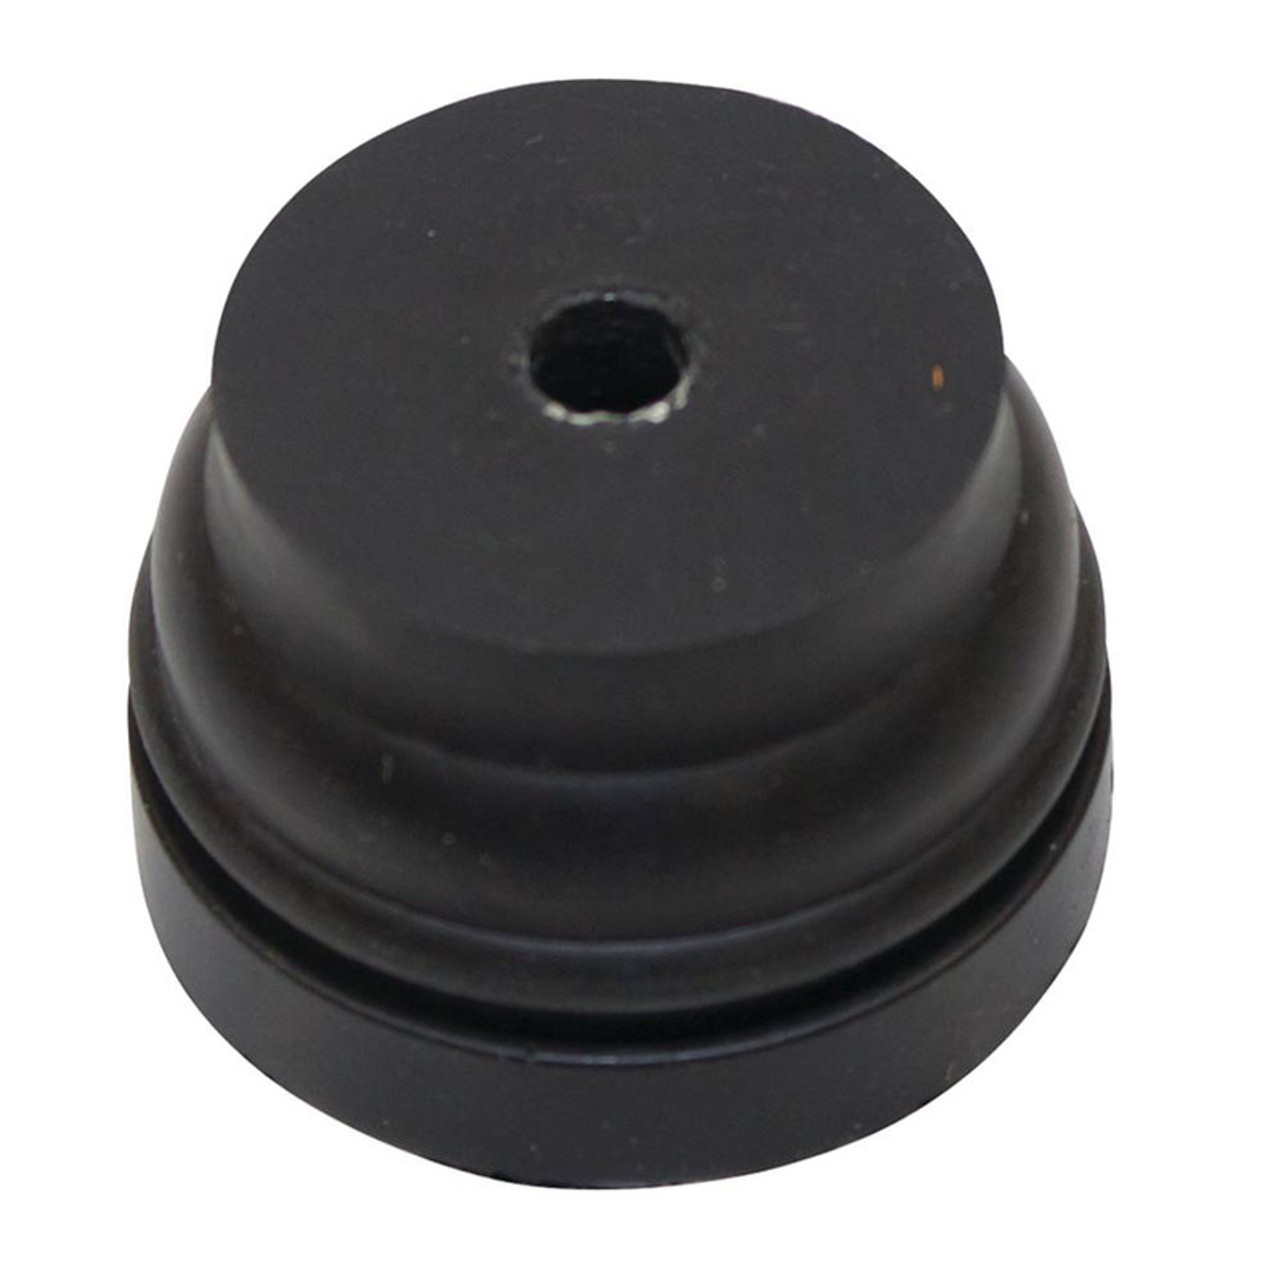 Annular Buffer Rubber Bushing Mount for Stihl 064 066 MS640 MS650 MS660 TS800 11227909900 1122 790 9900